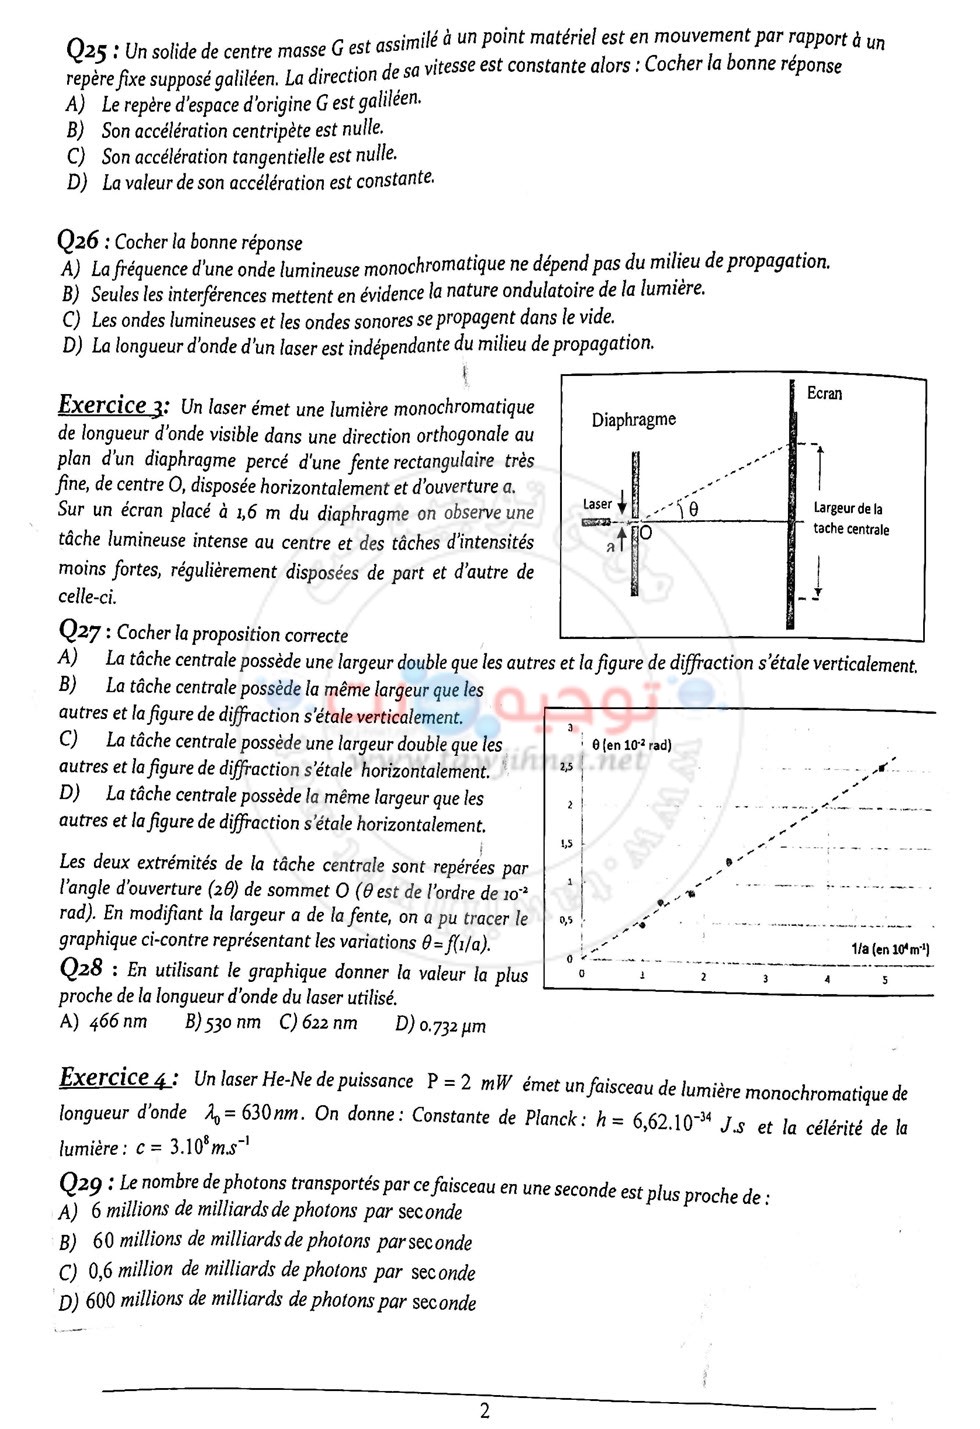 ENSA-concours-Physique-2022_Page_2.jpg